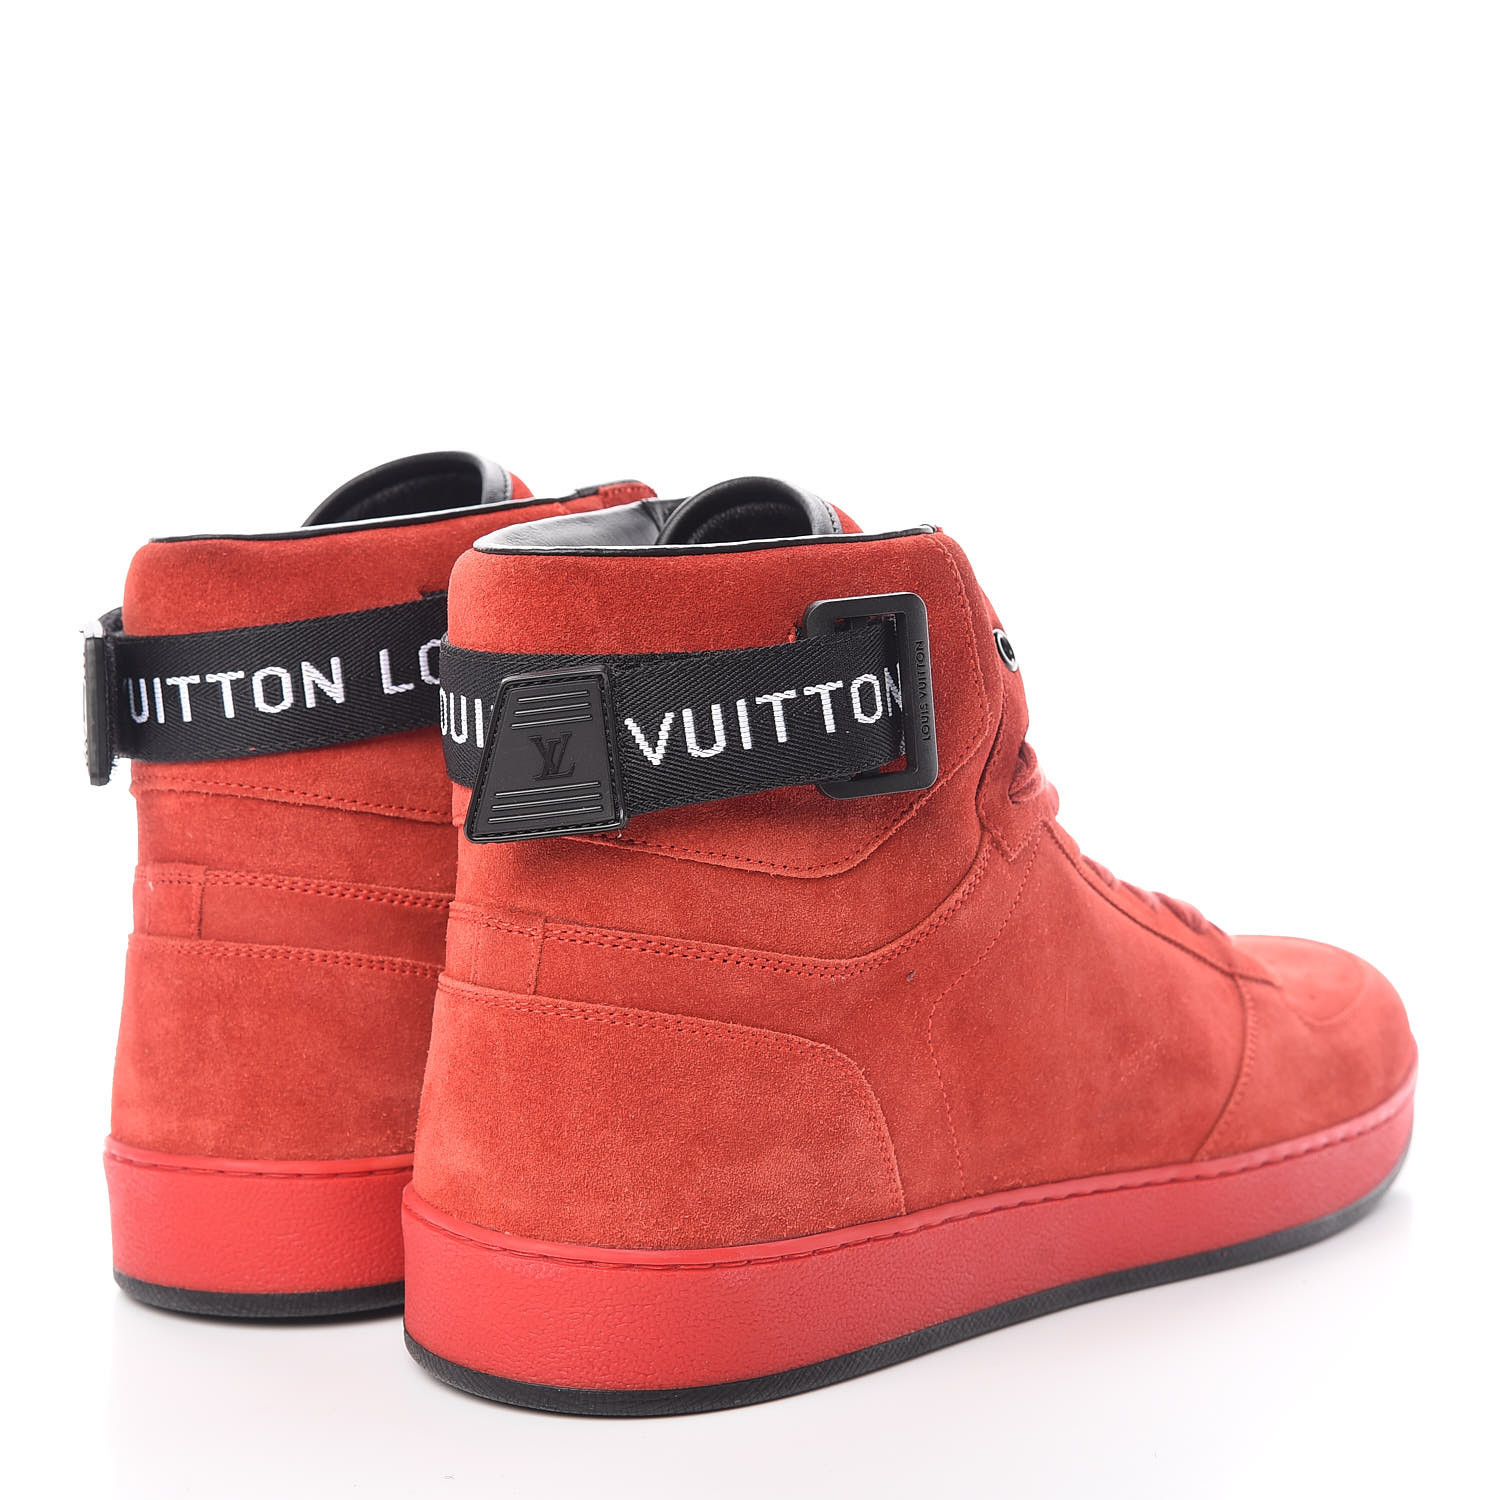 LOUIS VUITTON Suede Rivoli High Top Sneakers 11 Red 360647 | FASHIONPHILE